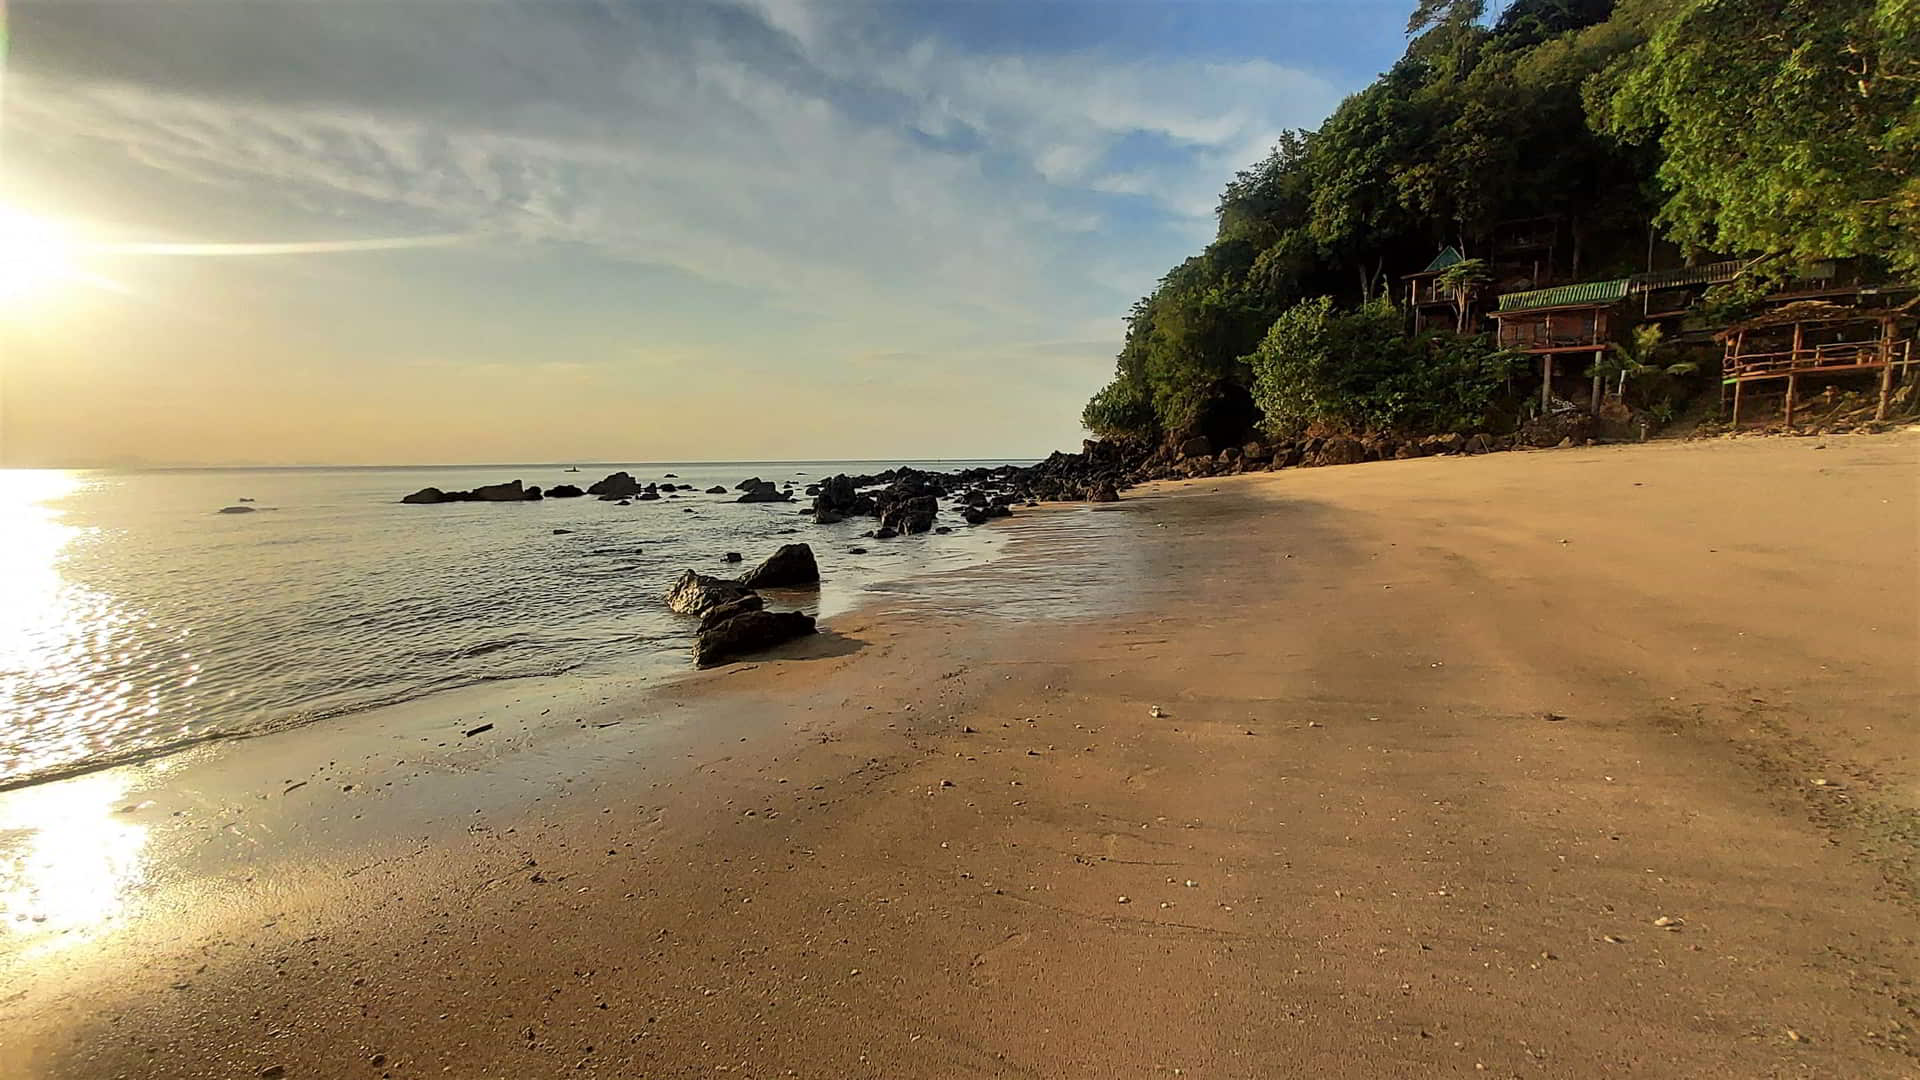 Guide to Koh Jum, one of Thailand's most peaceful islands